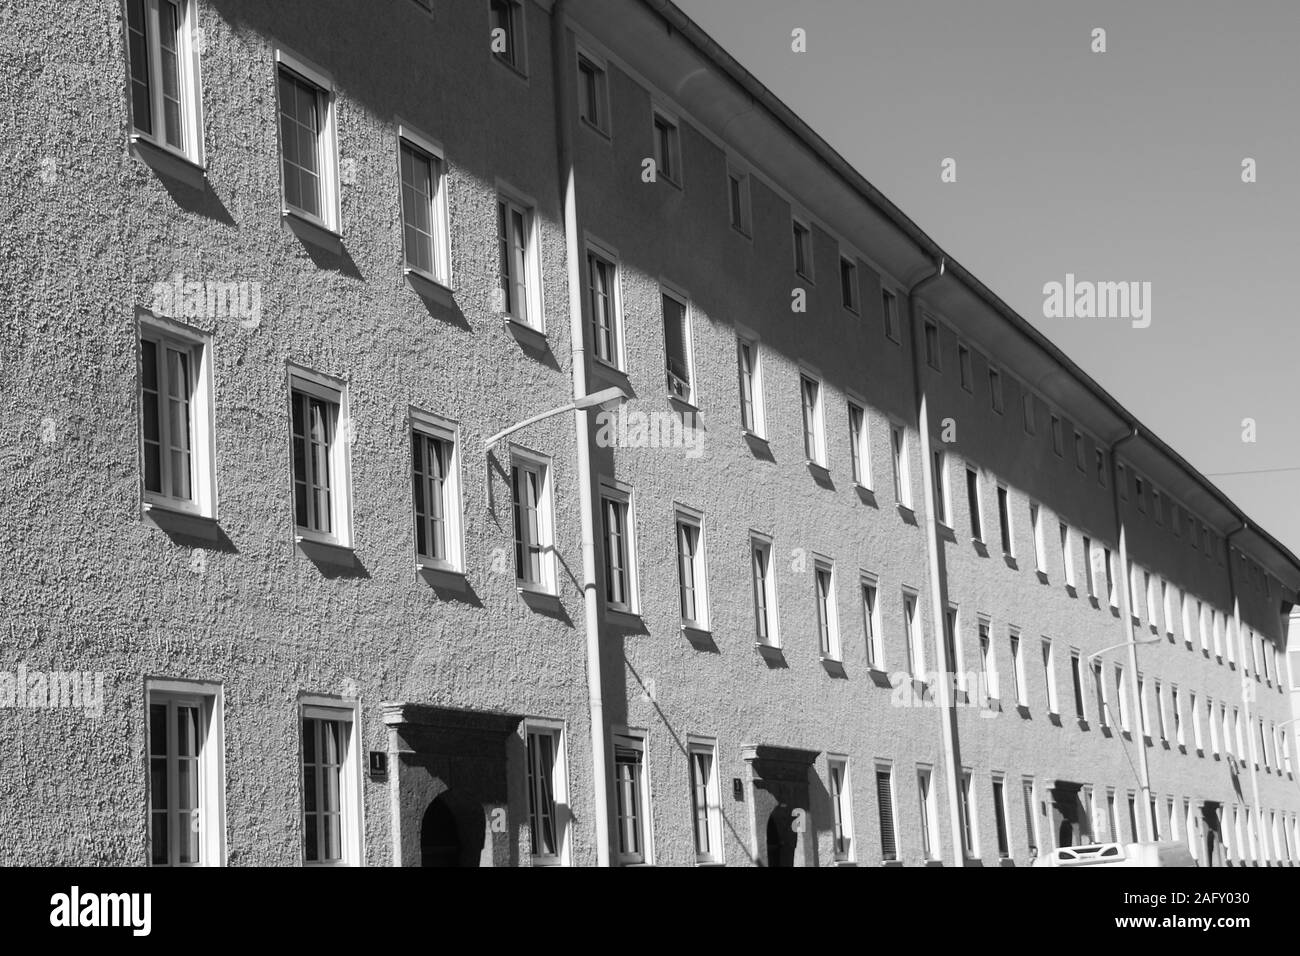 Block of flats in the suburbia. Building for the working class, erected presumably in the 1950s. Salzburg city, district Lehen, Austria, Europe. Stock Photo